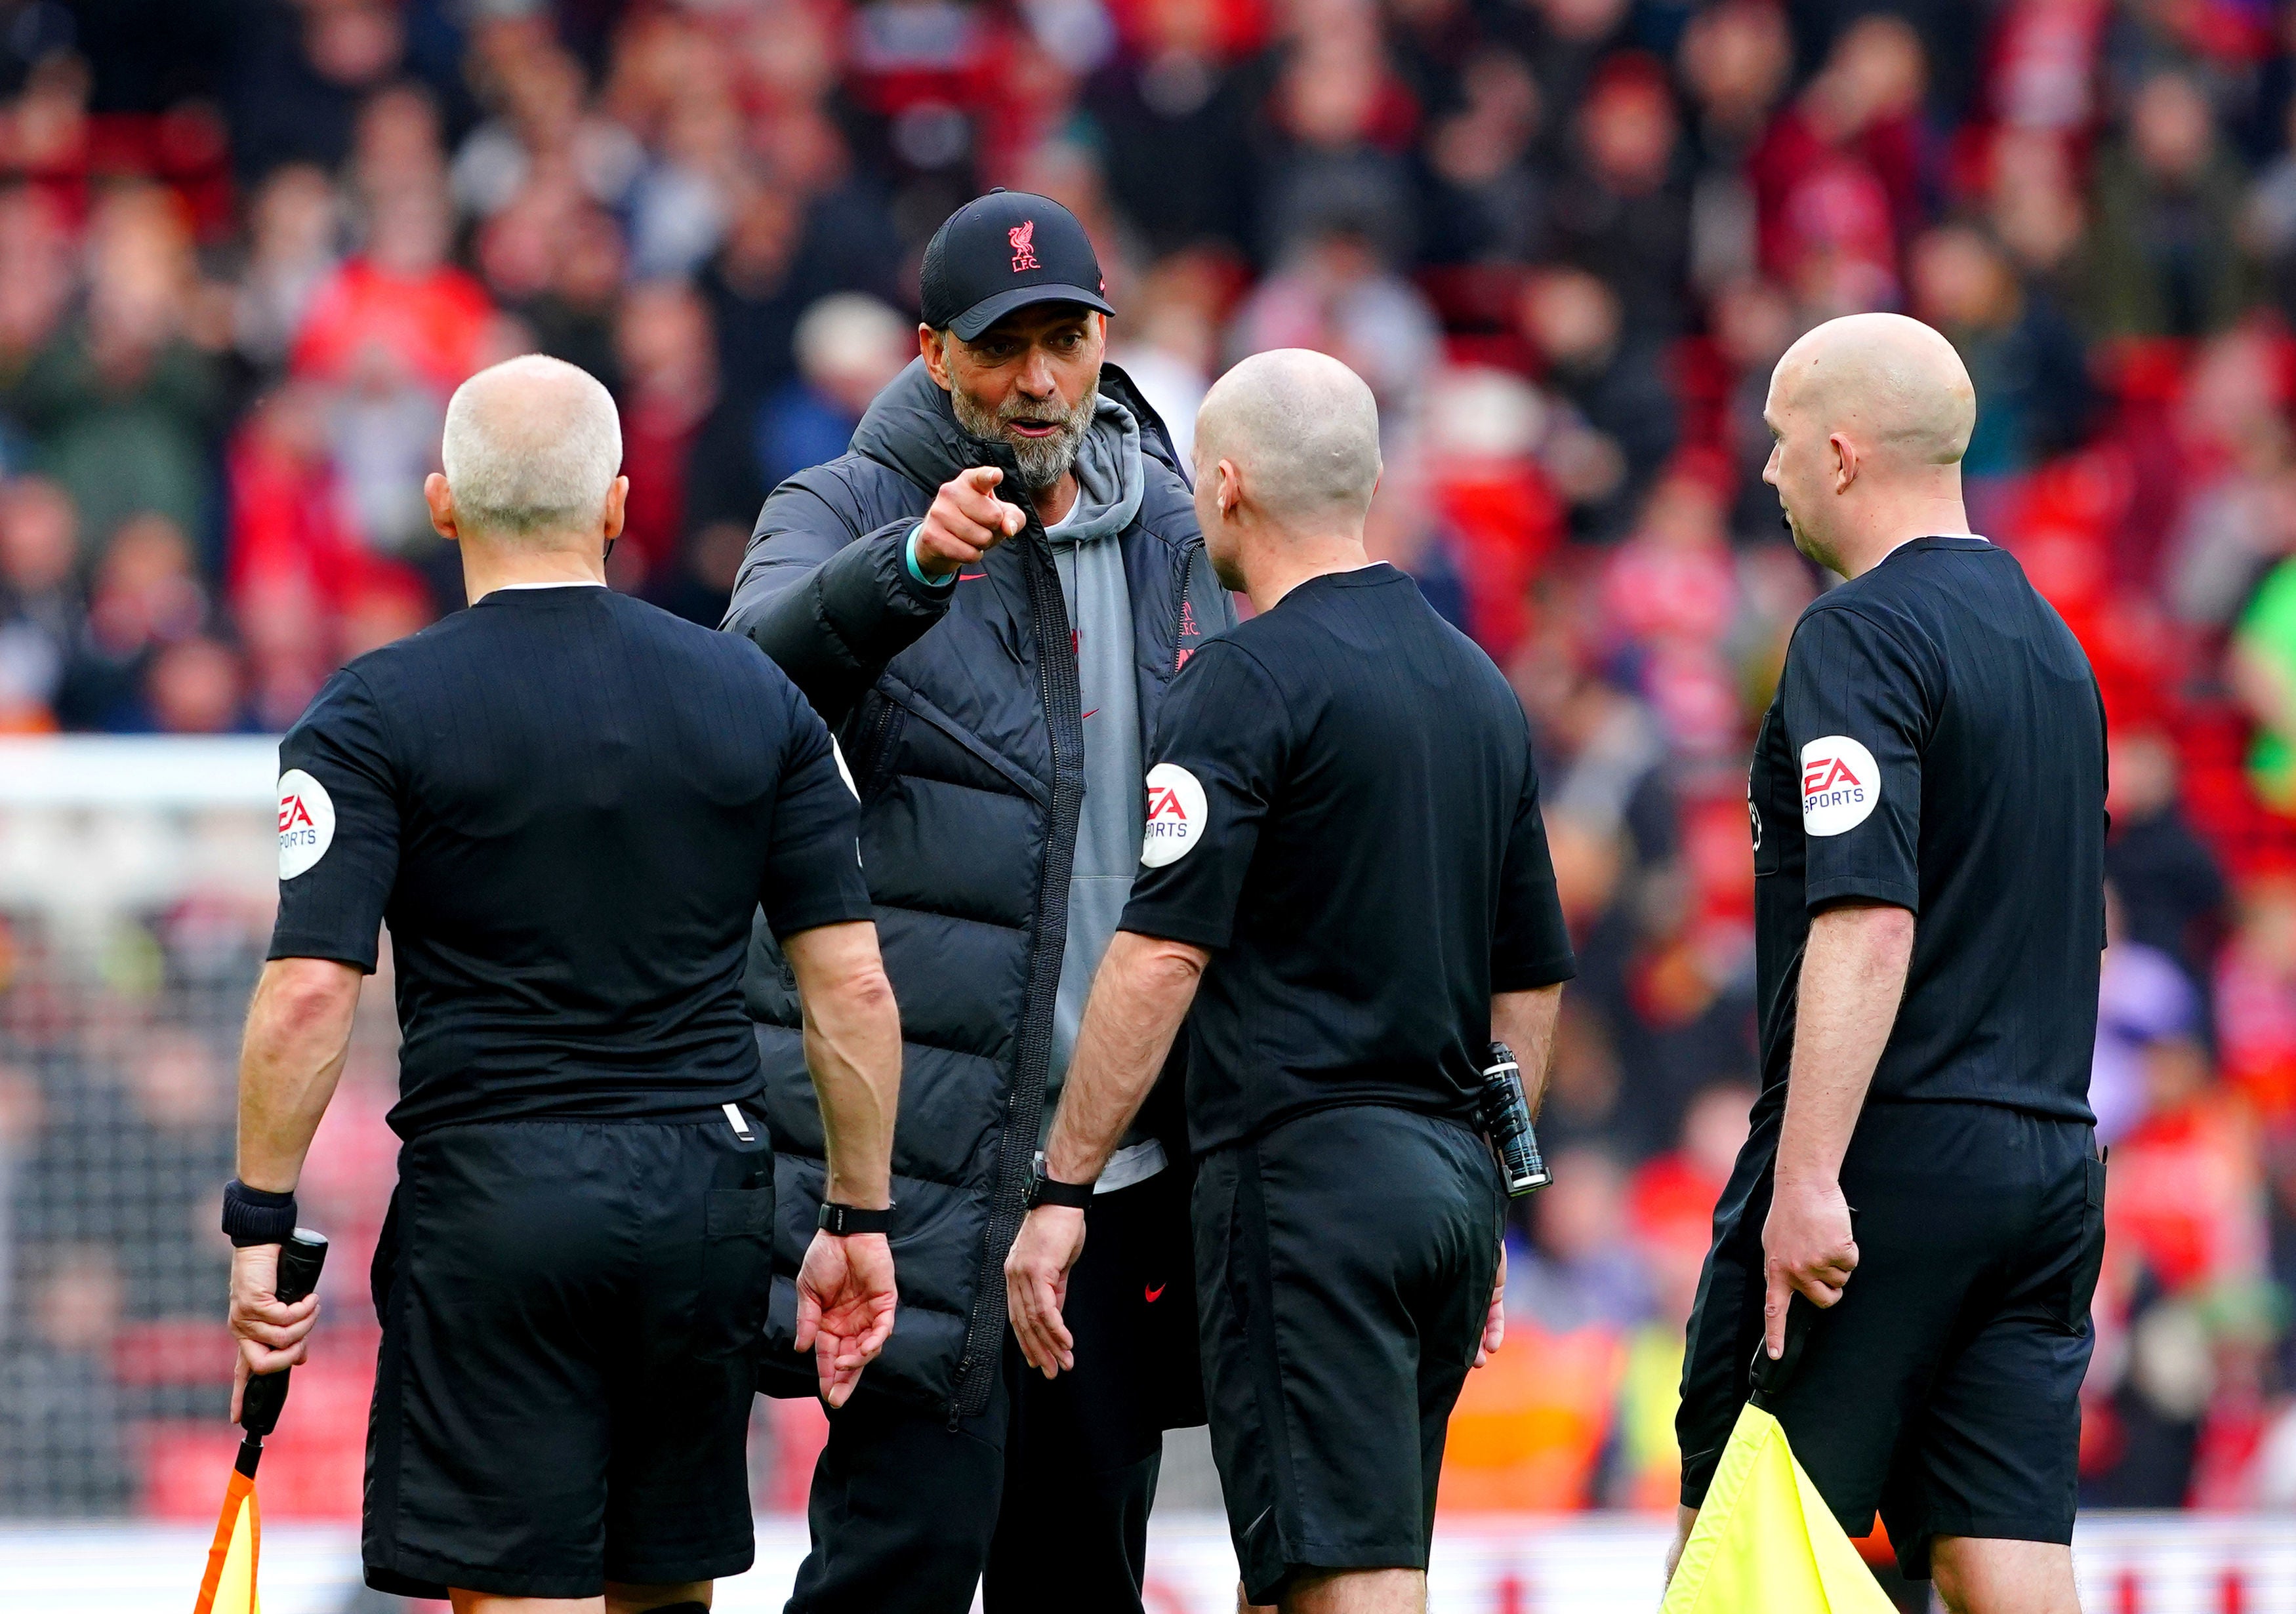 Jurgen Klopp was furious with the referee Paul Tierney